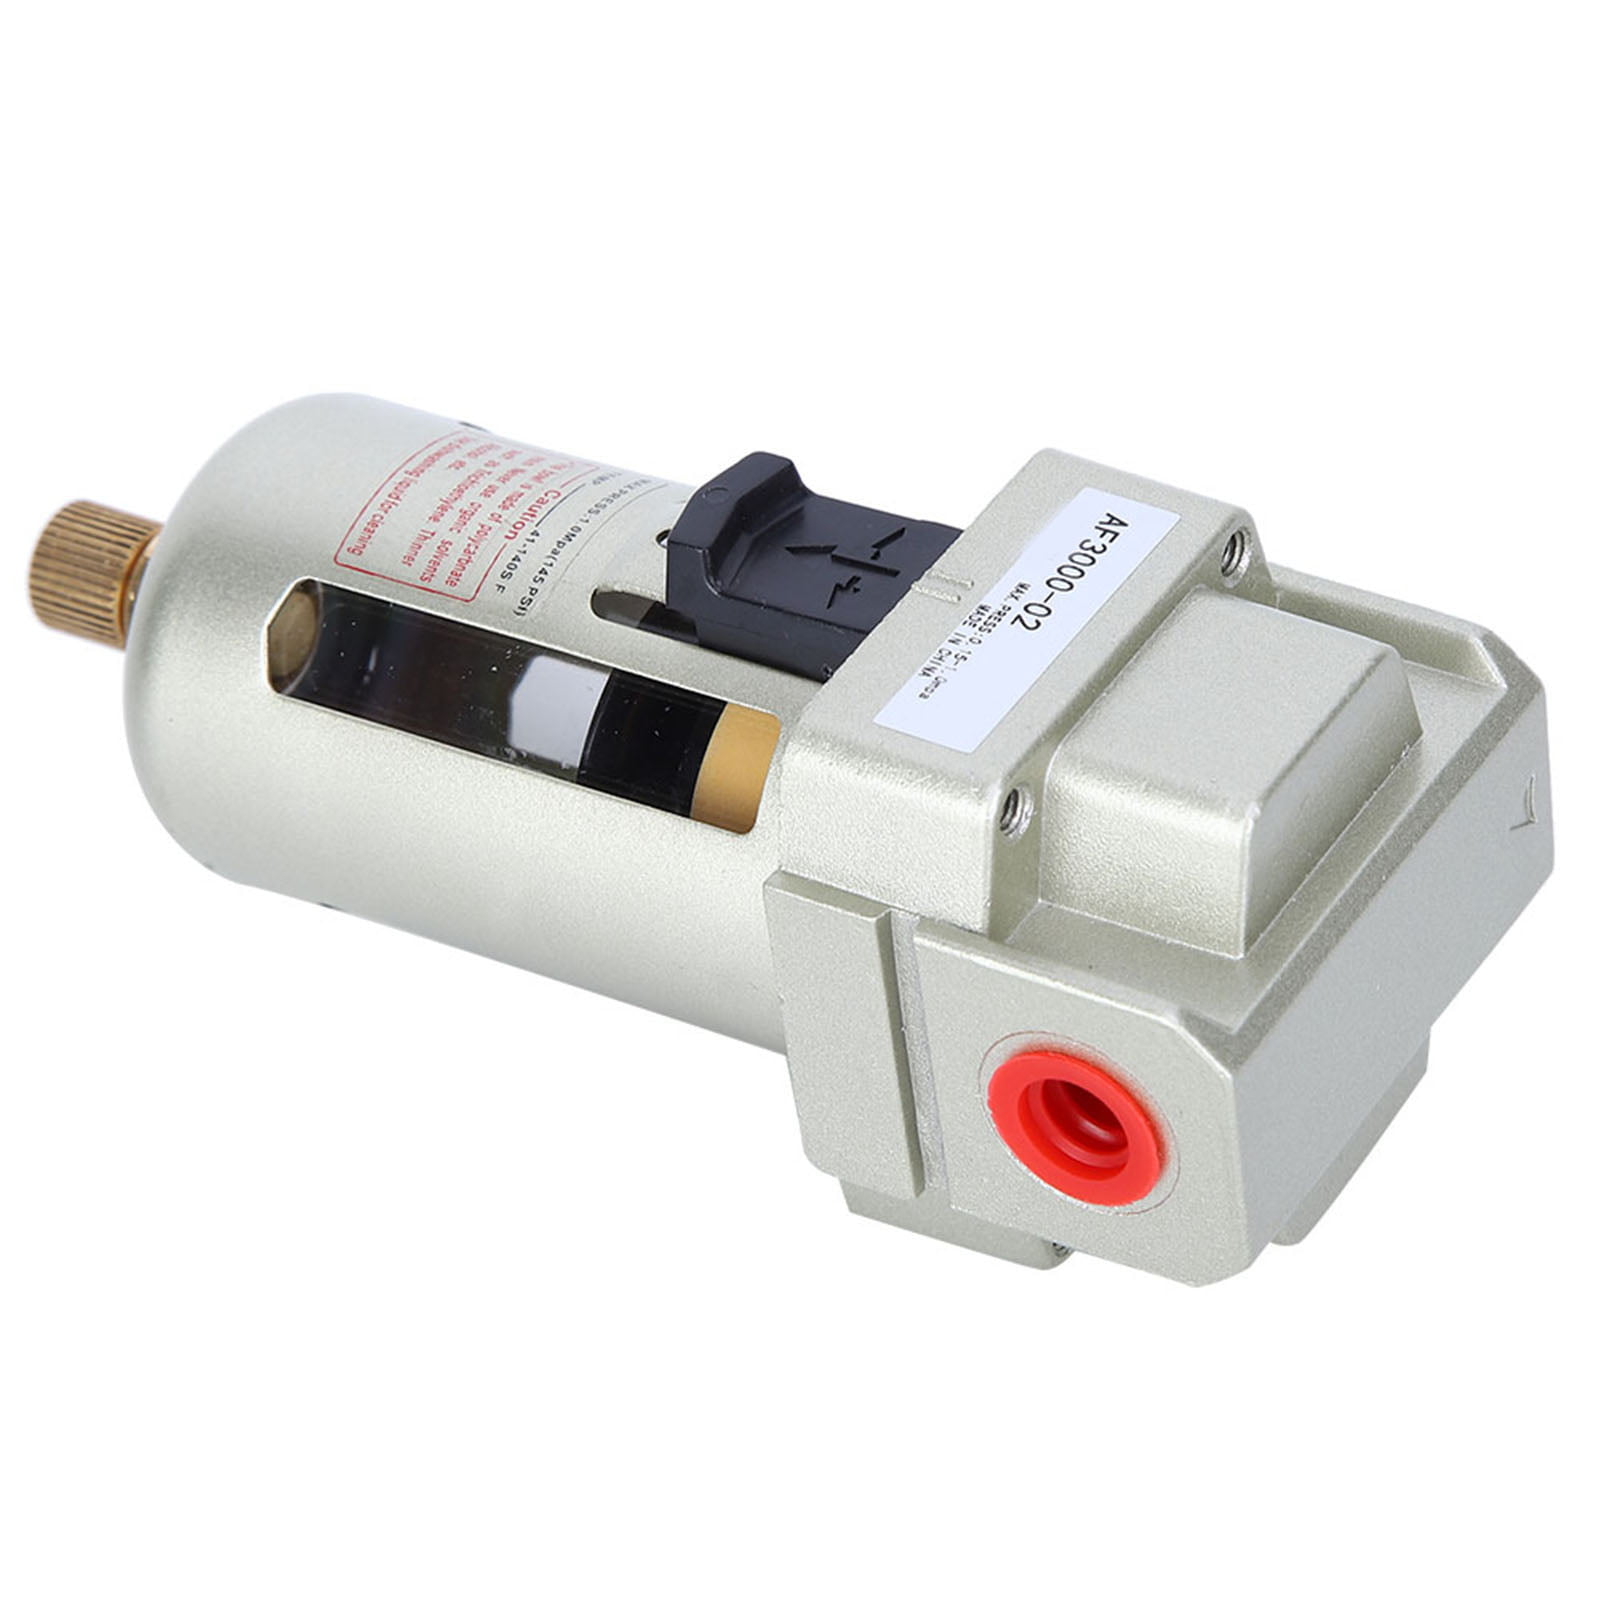 AF3000-02 1/4" Air Filter Oil Water Separator Filter 1500L/ Min 1.0mpa Durable 